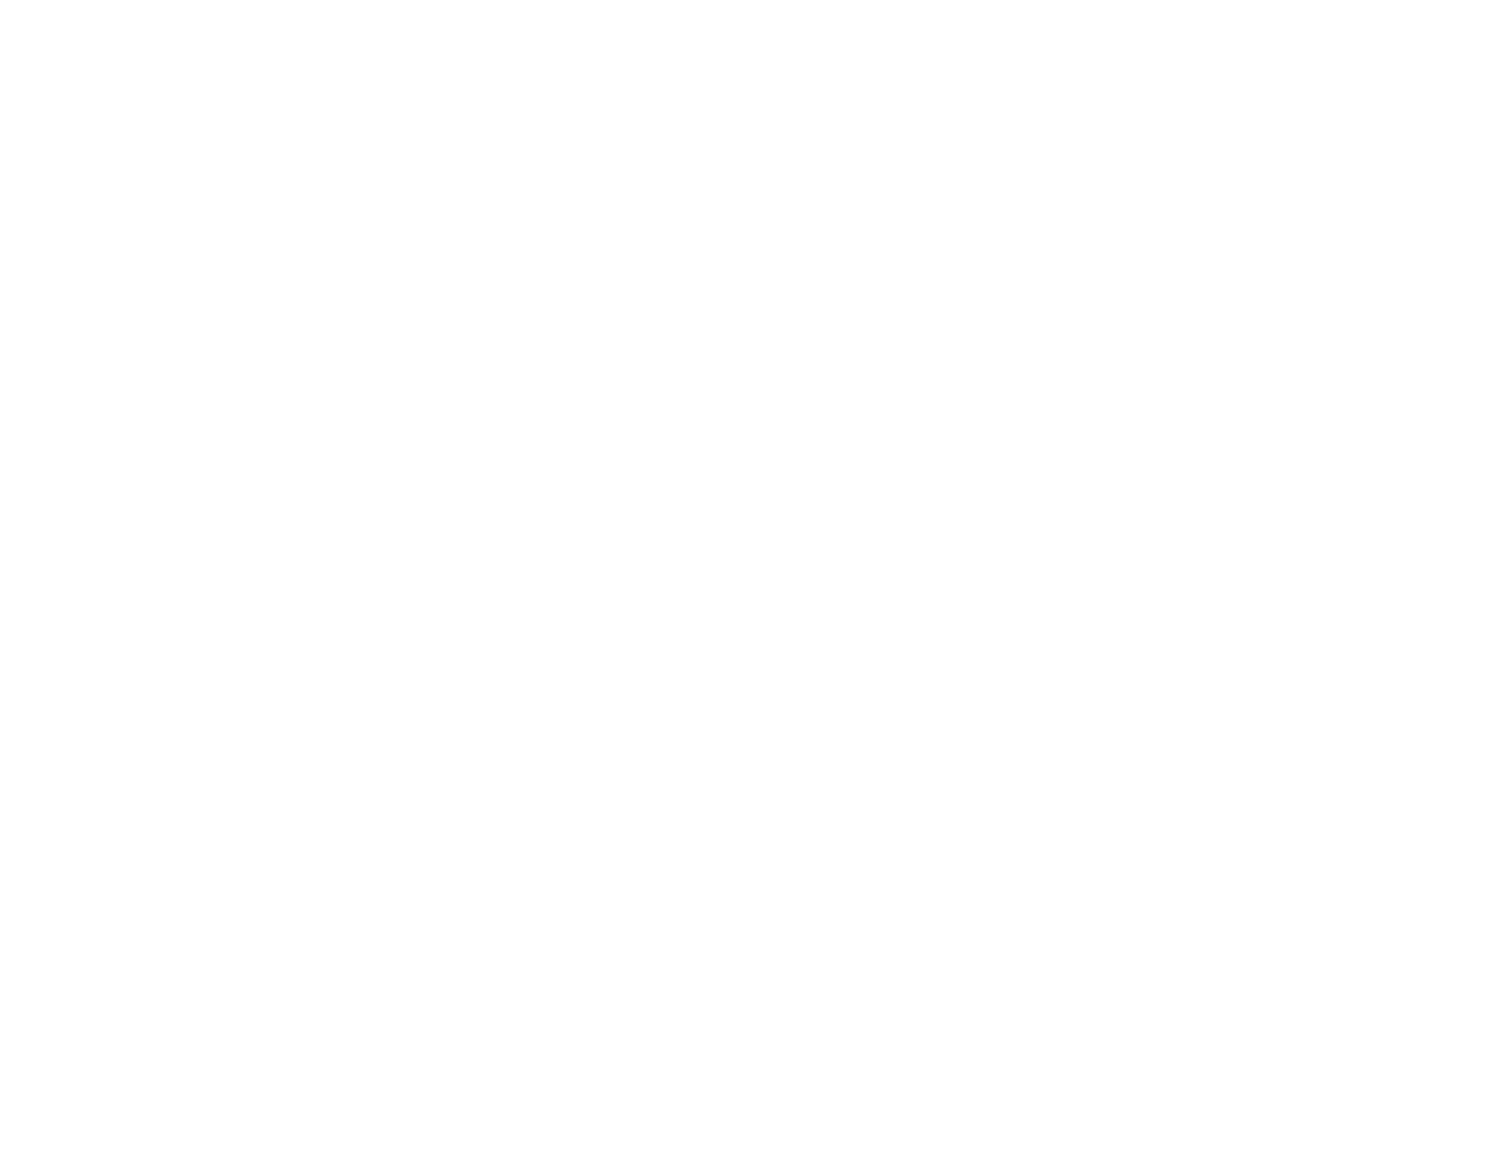 AMGKY